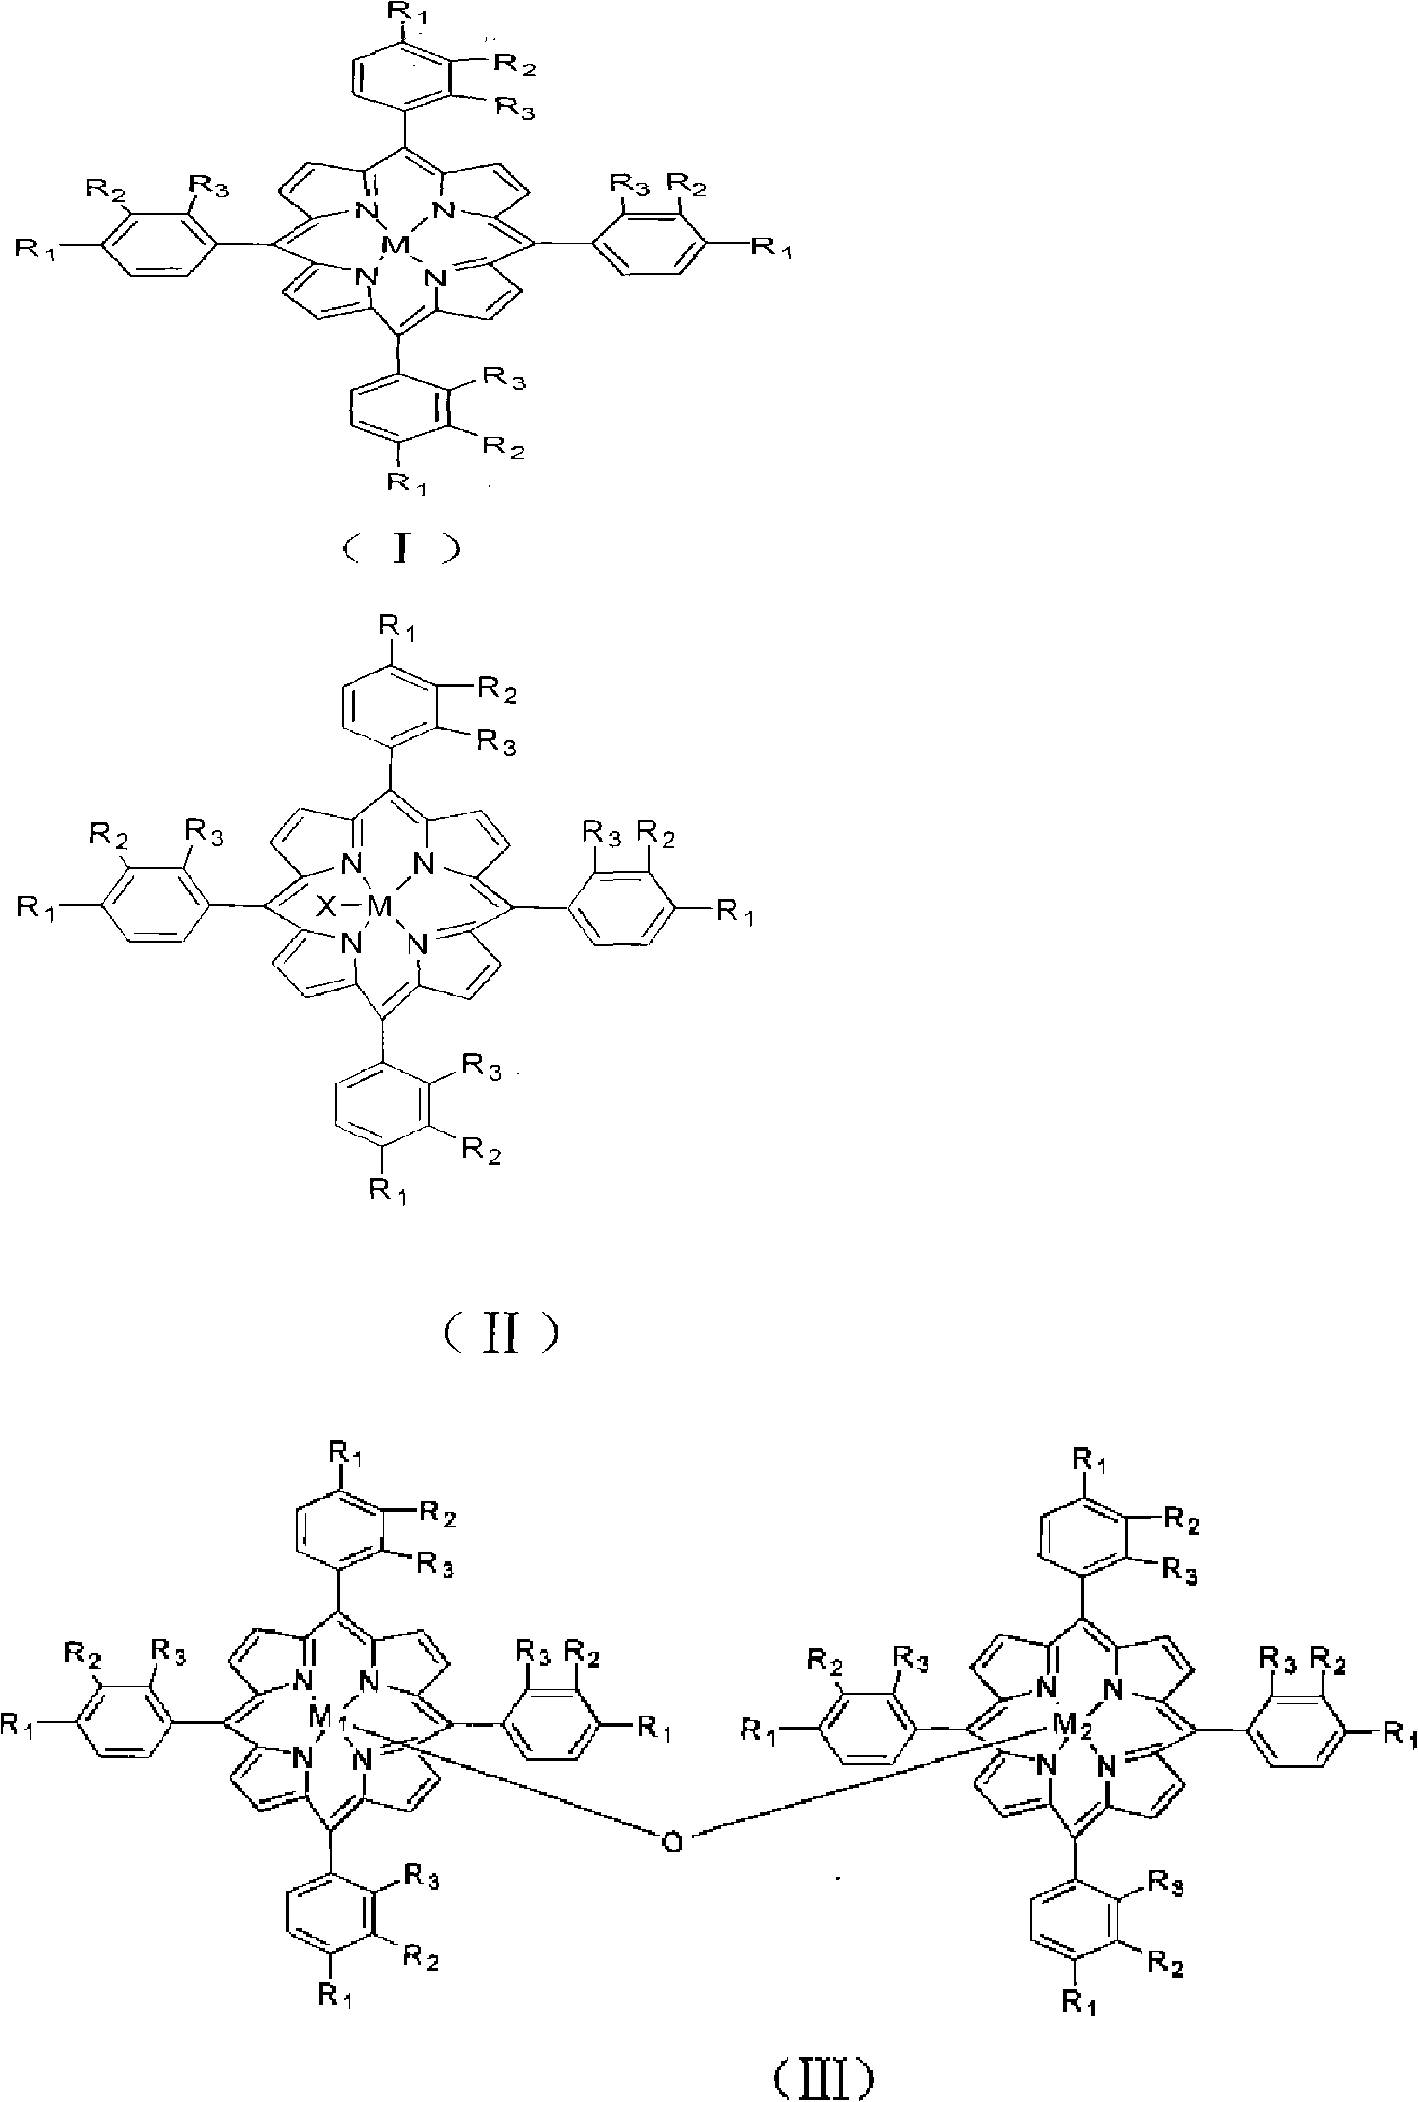 Technique for using methylbenzene to prepare benzaldehyde and benzene methanol by multistage oxidation and equipment